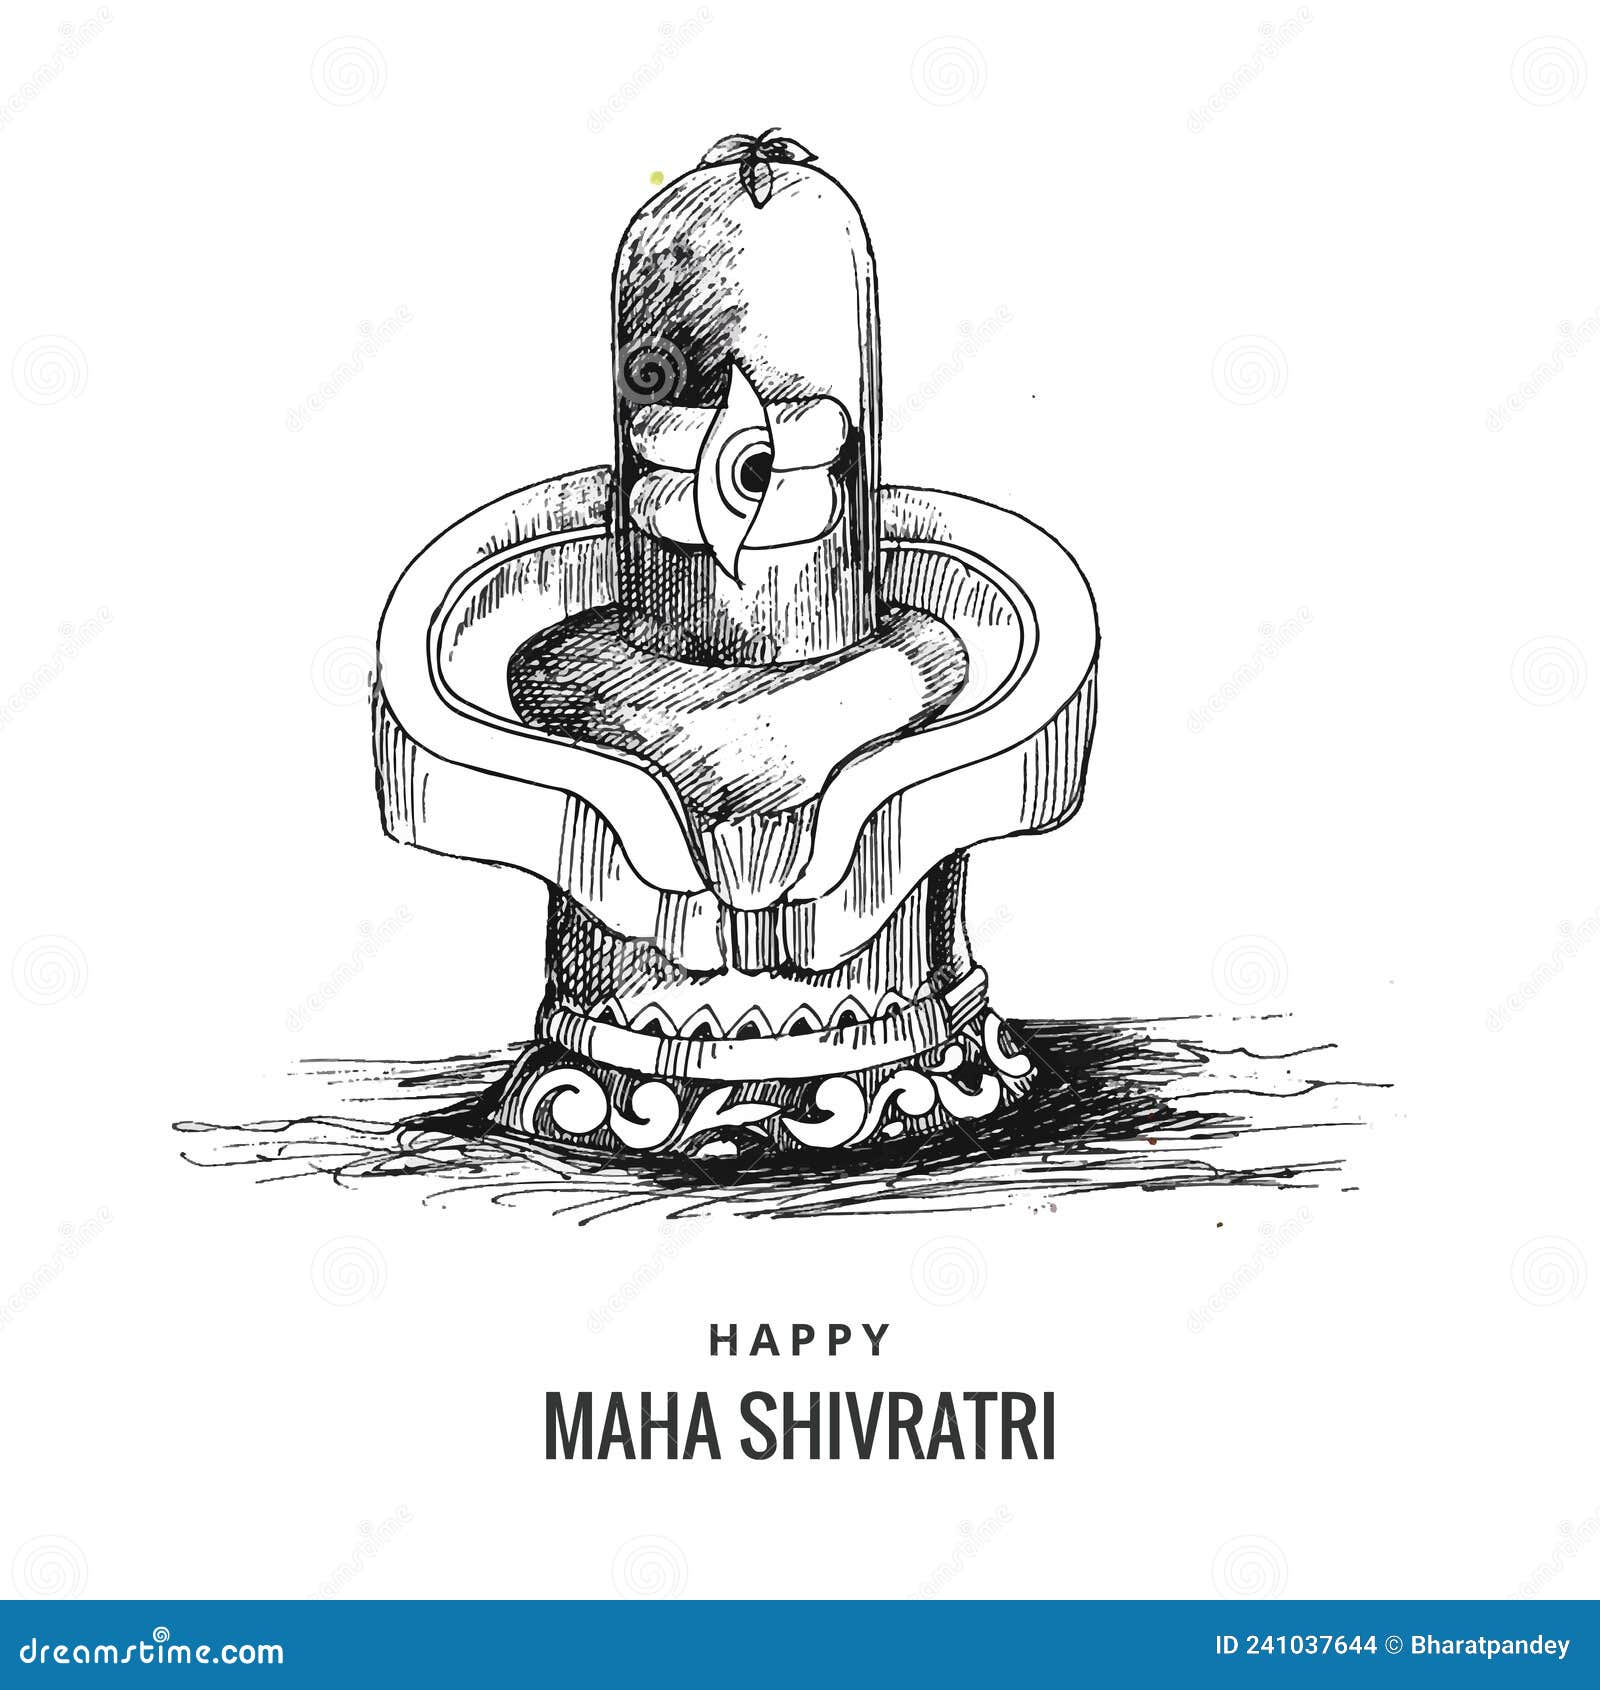 For indian festival happy sawan shivratri means Vector Image